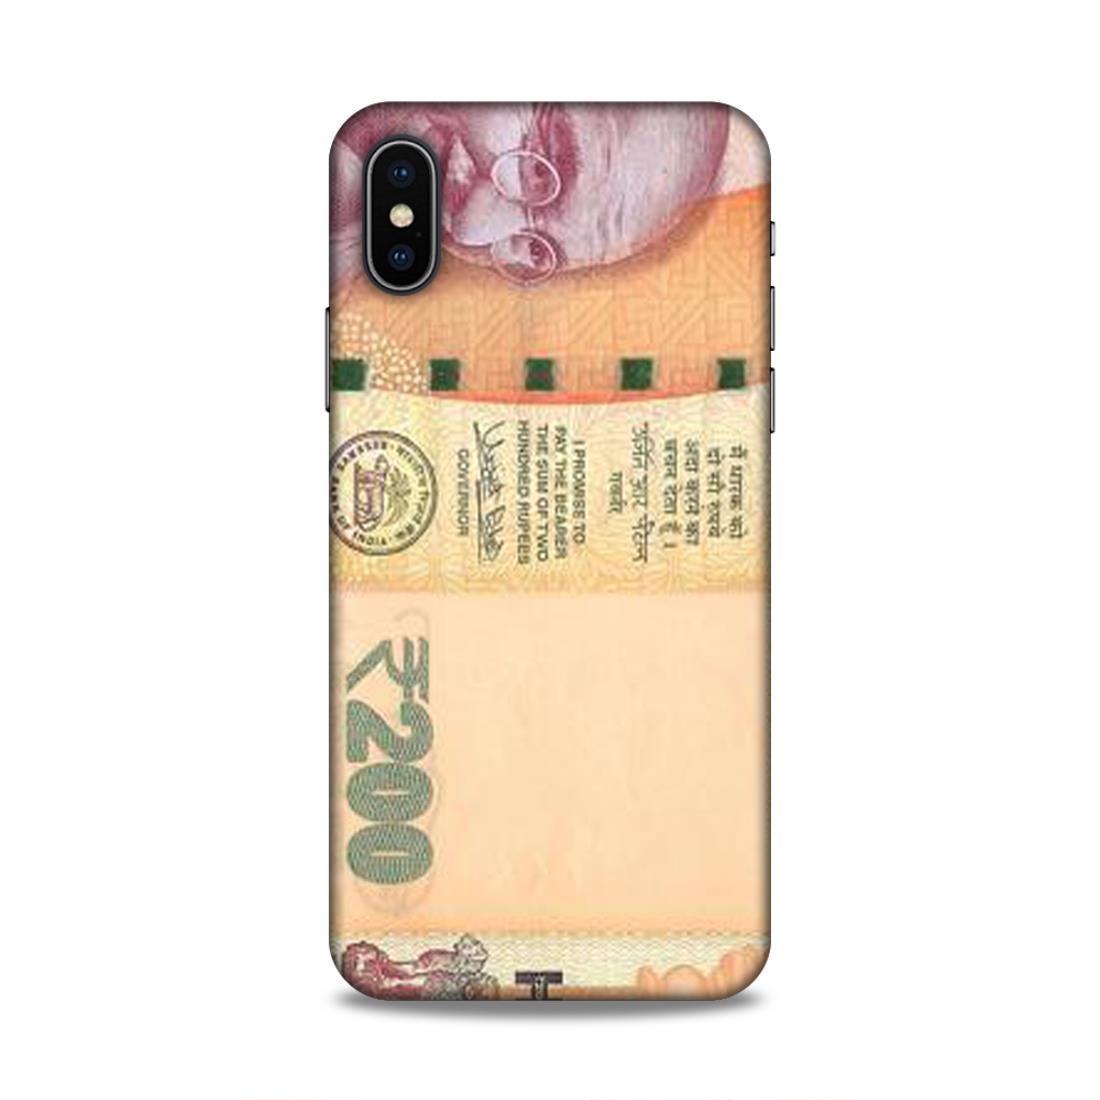 Rs 200 Currency Note iPhone X Phone Case Cover